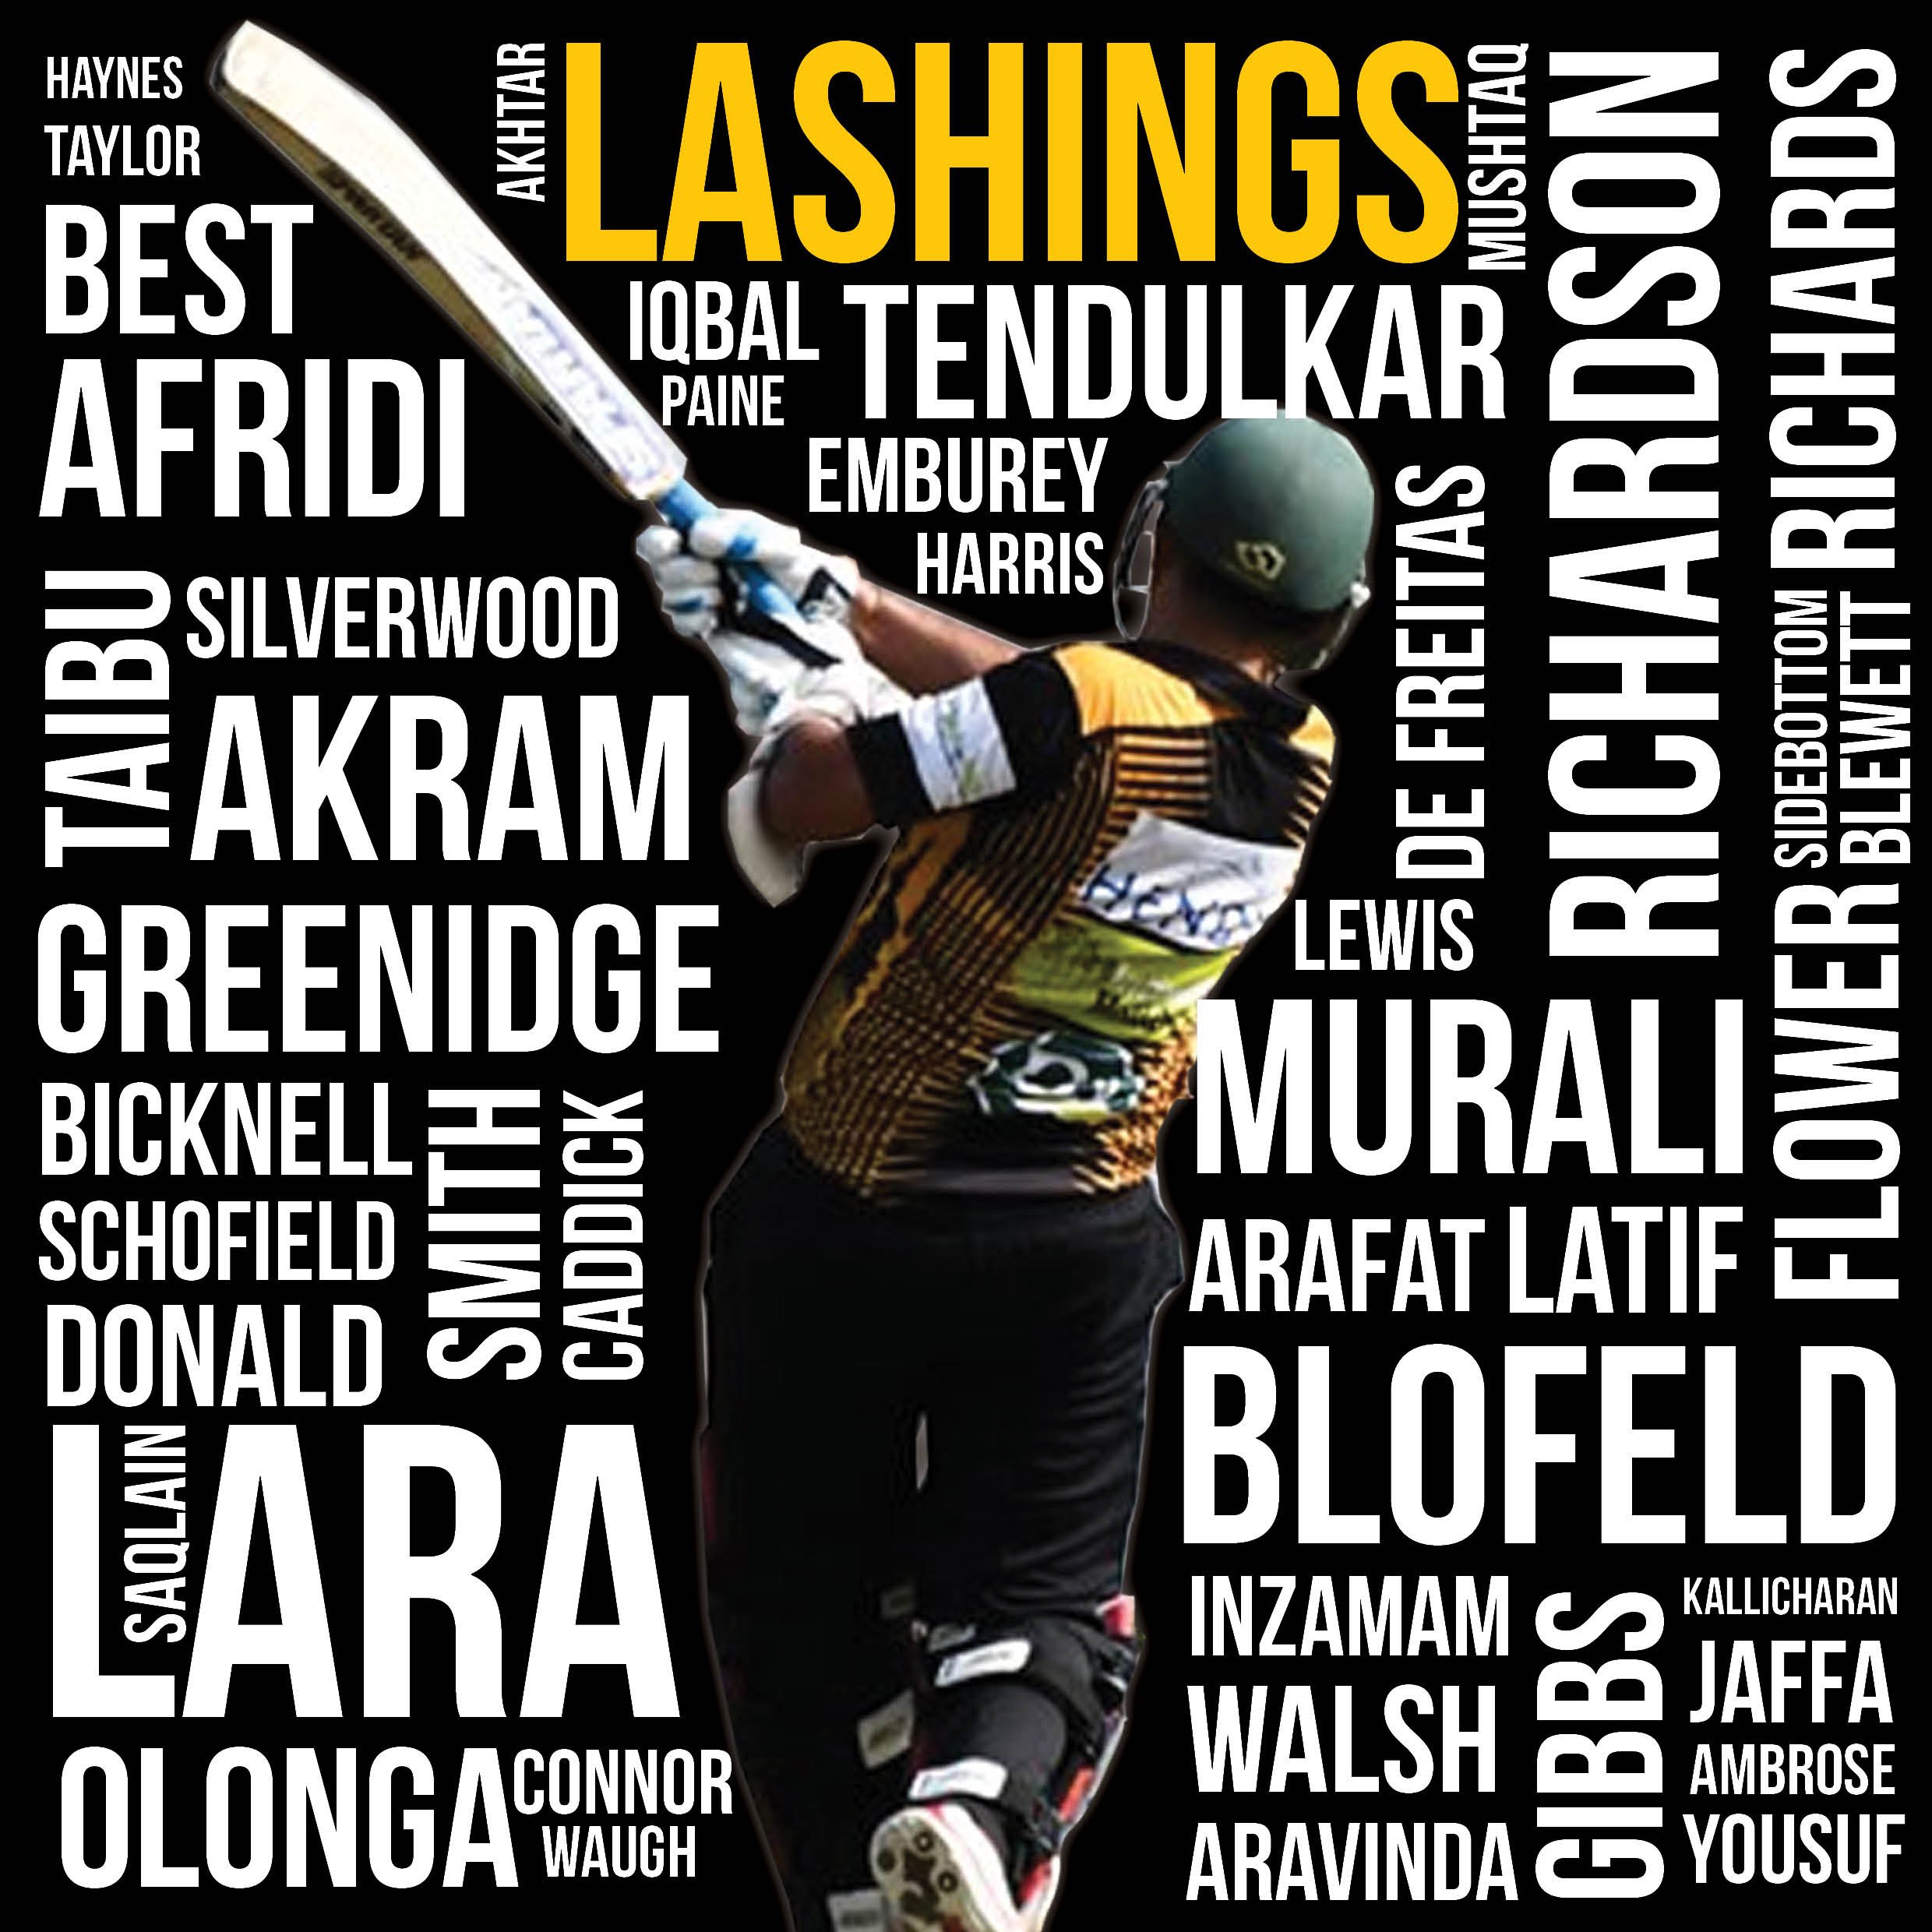 The Lashings World XI are coming to Cherry Tree